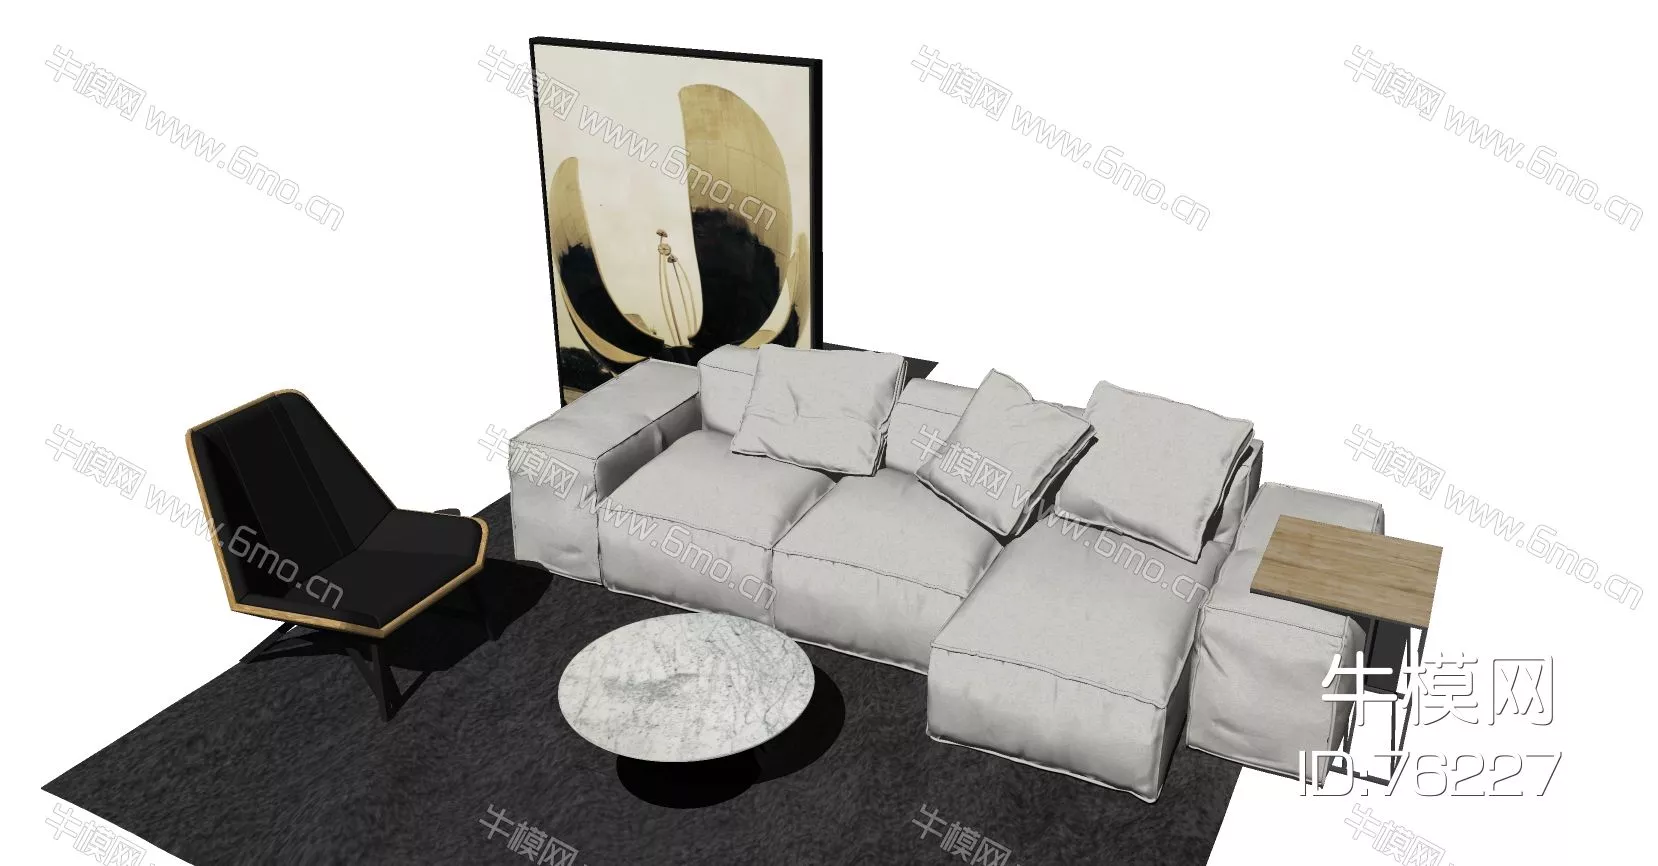 MODERN SOFA - SKETCHUP 3D MODEL - VRAY OR ENSCAPE - ID13166